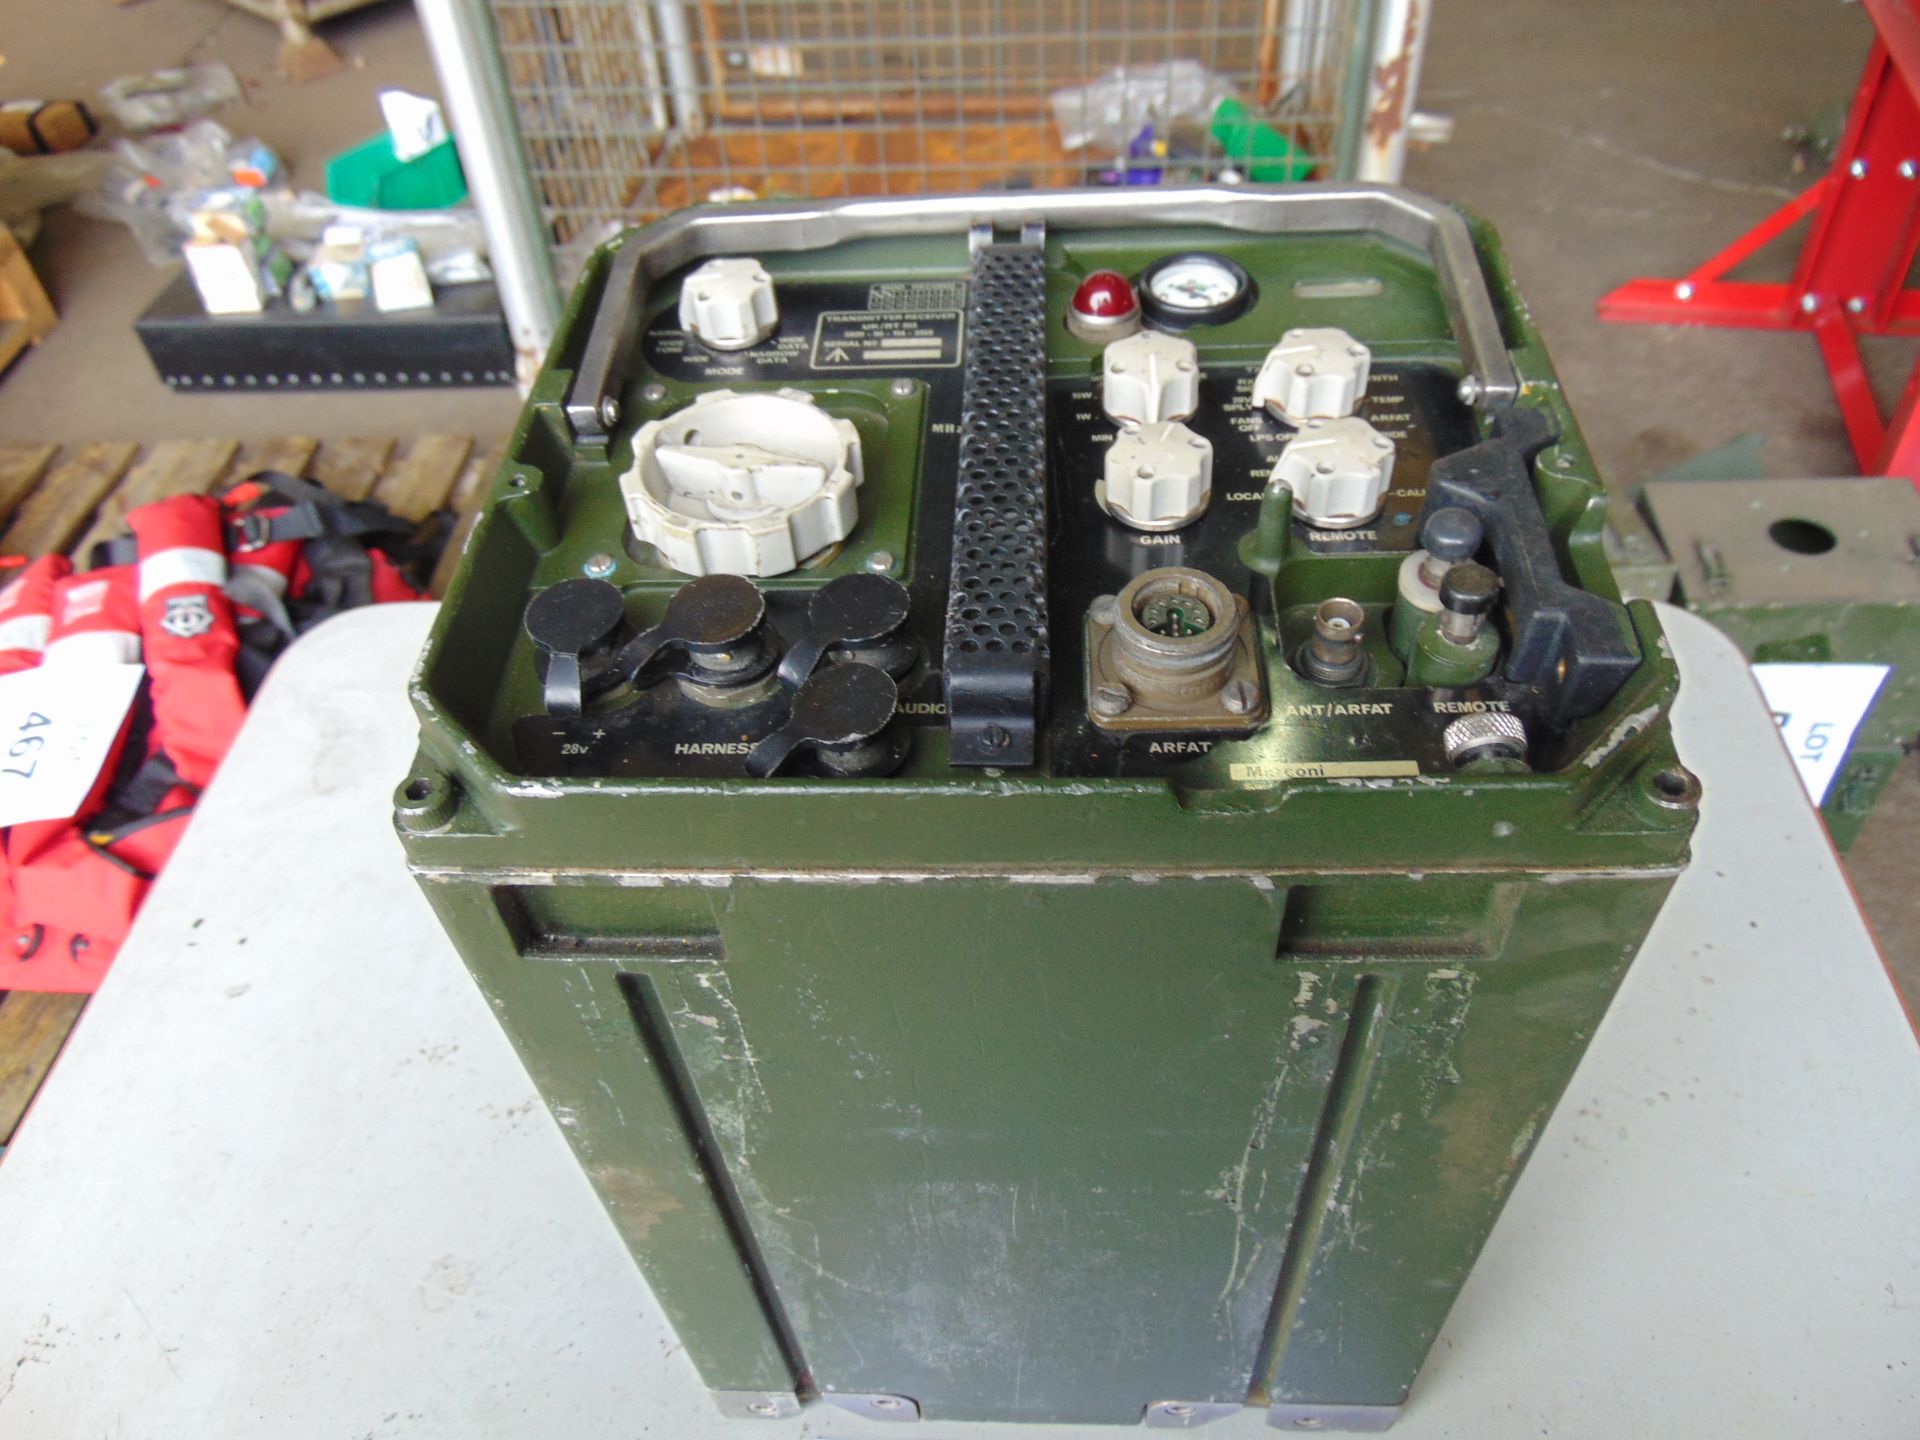 Very Nice RT 353 VHF Land Rover Clansman Transmitter Receiver as shown - Image 6 of 8